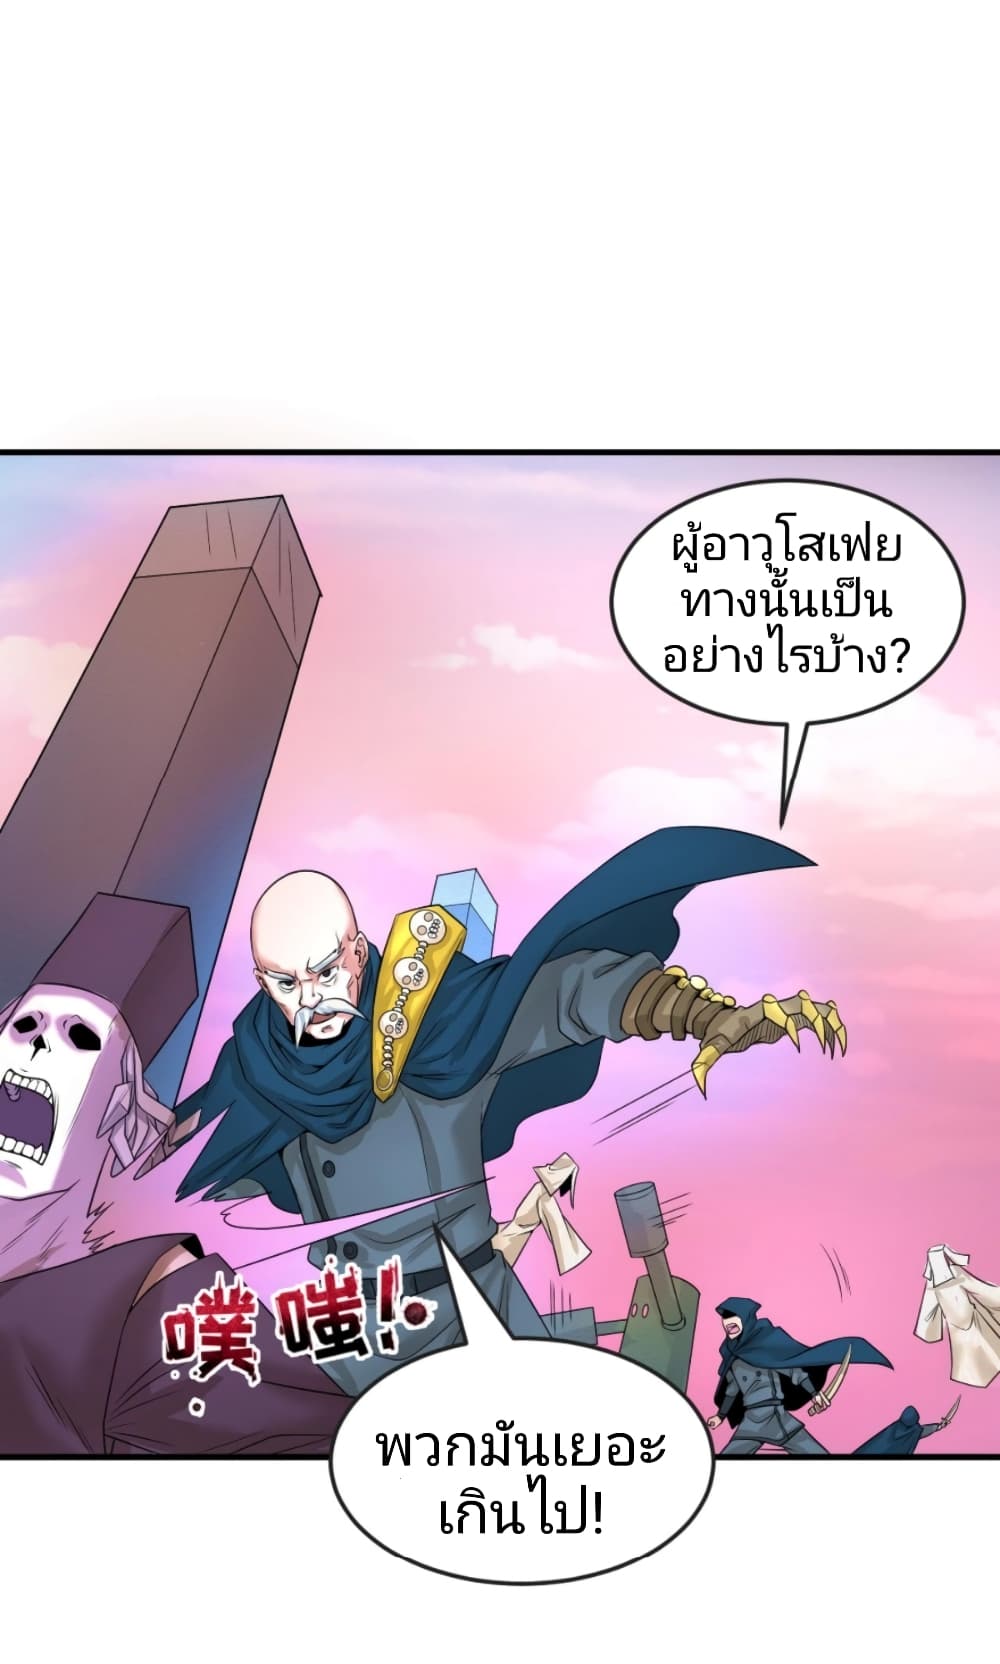 The Age of Ghost Spirits à¸à¸­à¸à¸à¸µà¹ 30 (23)